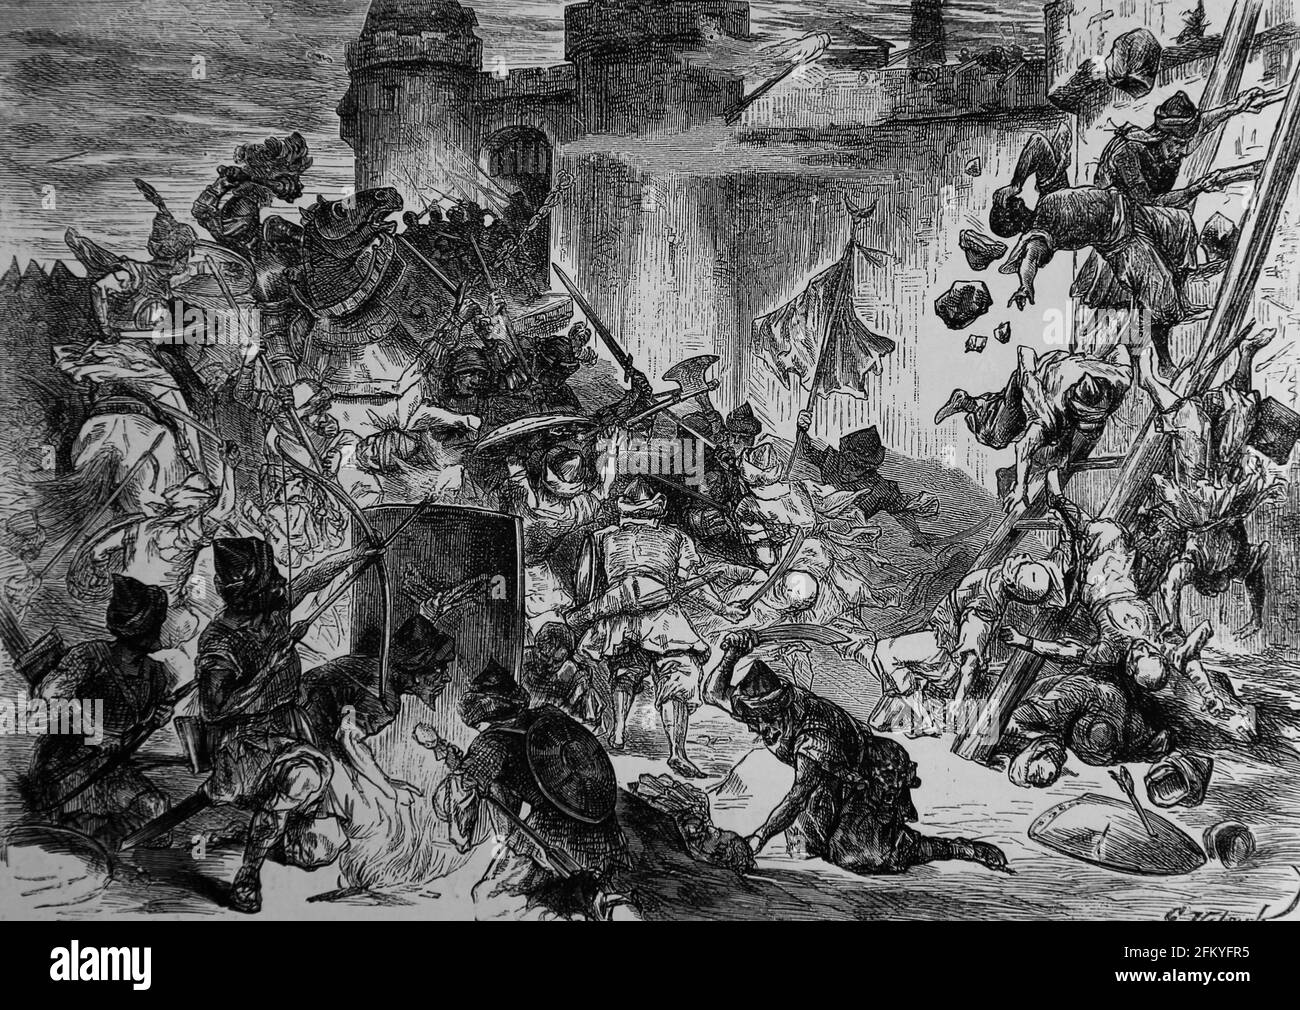 Siege of Vienna by the Ottoman Empire, 1529. Engraving. Stock Photo